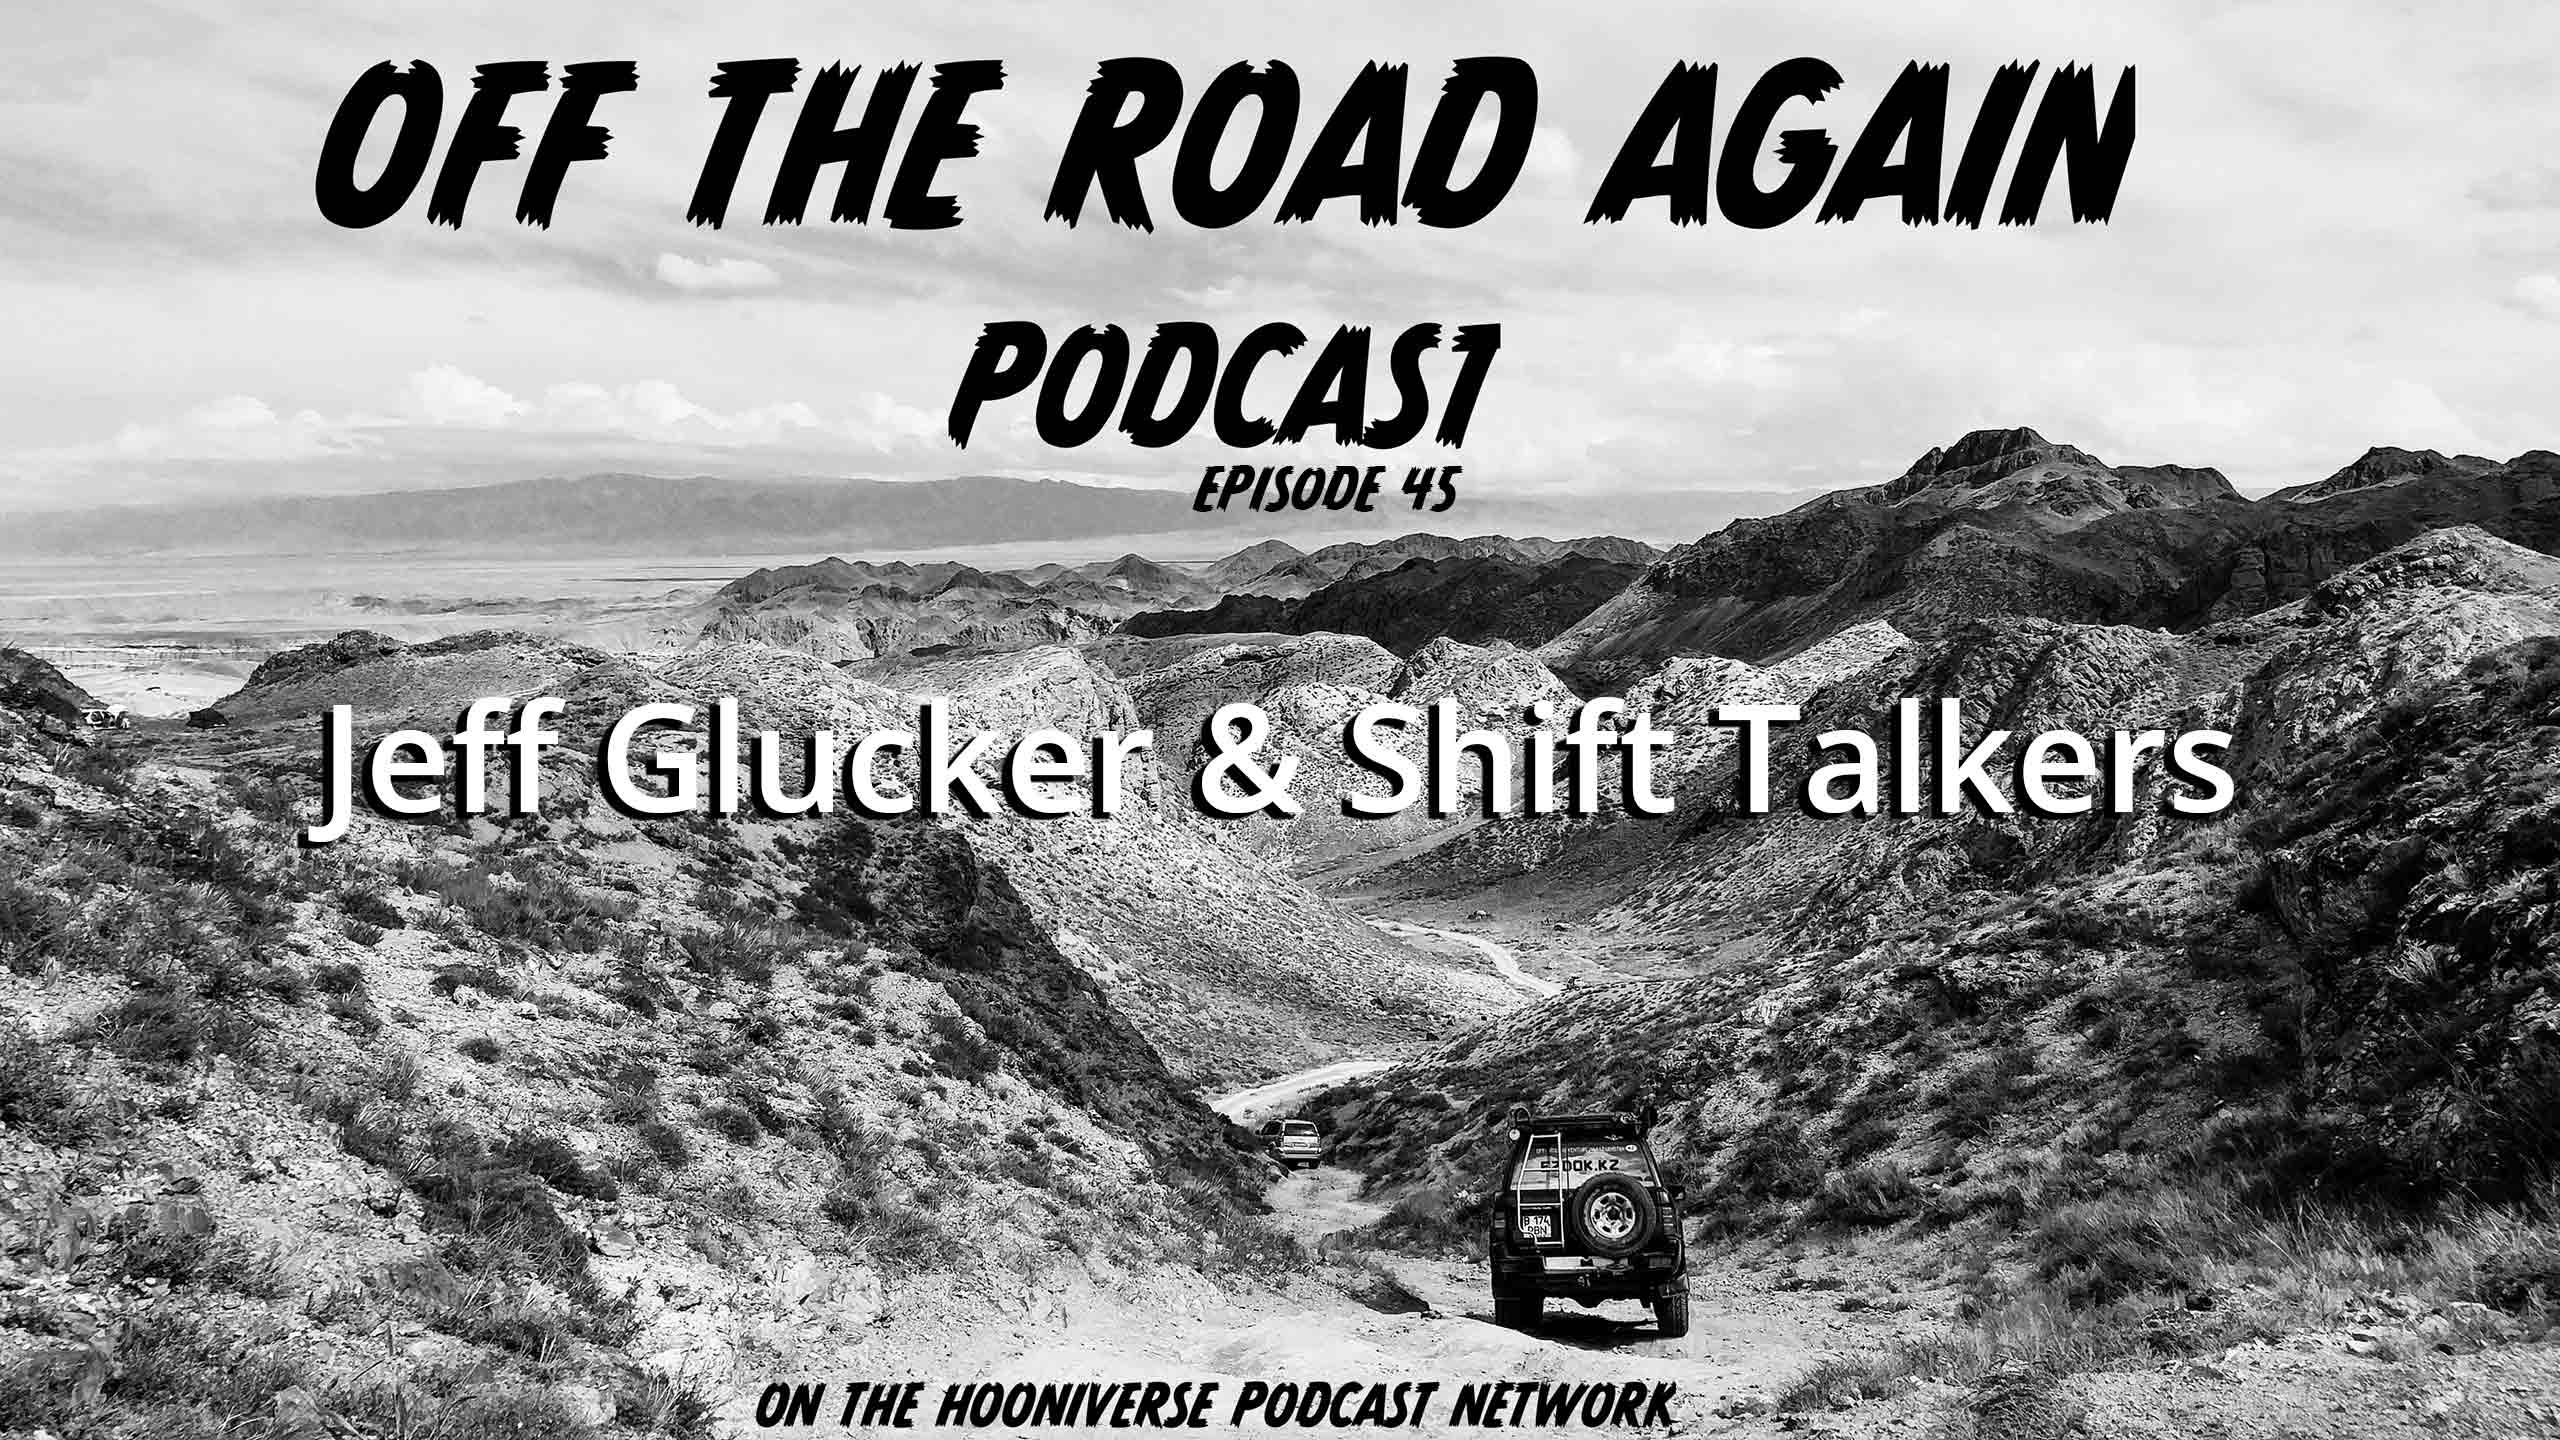 Jeff-Glucker-Shift-Talkers-Off-The-Road-Again-Podcast-Episode-45